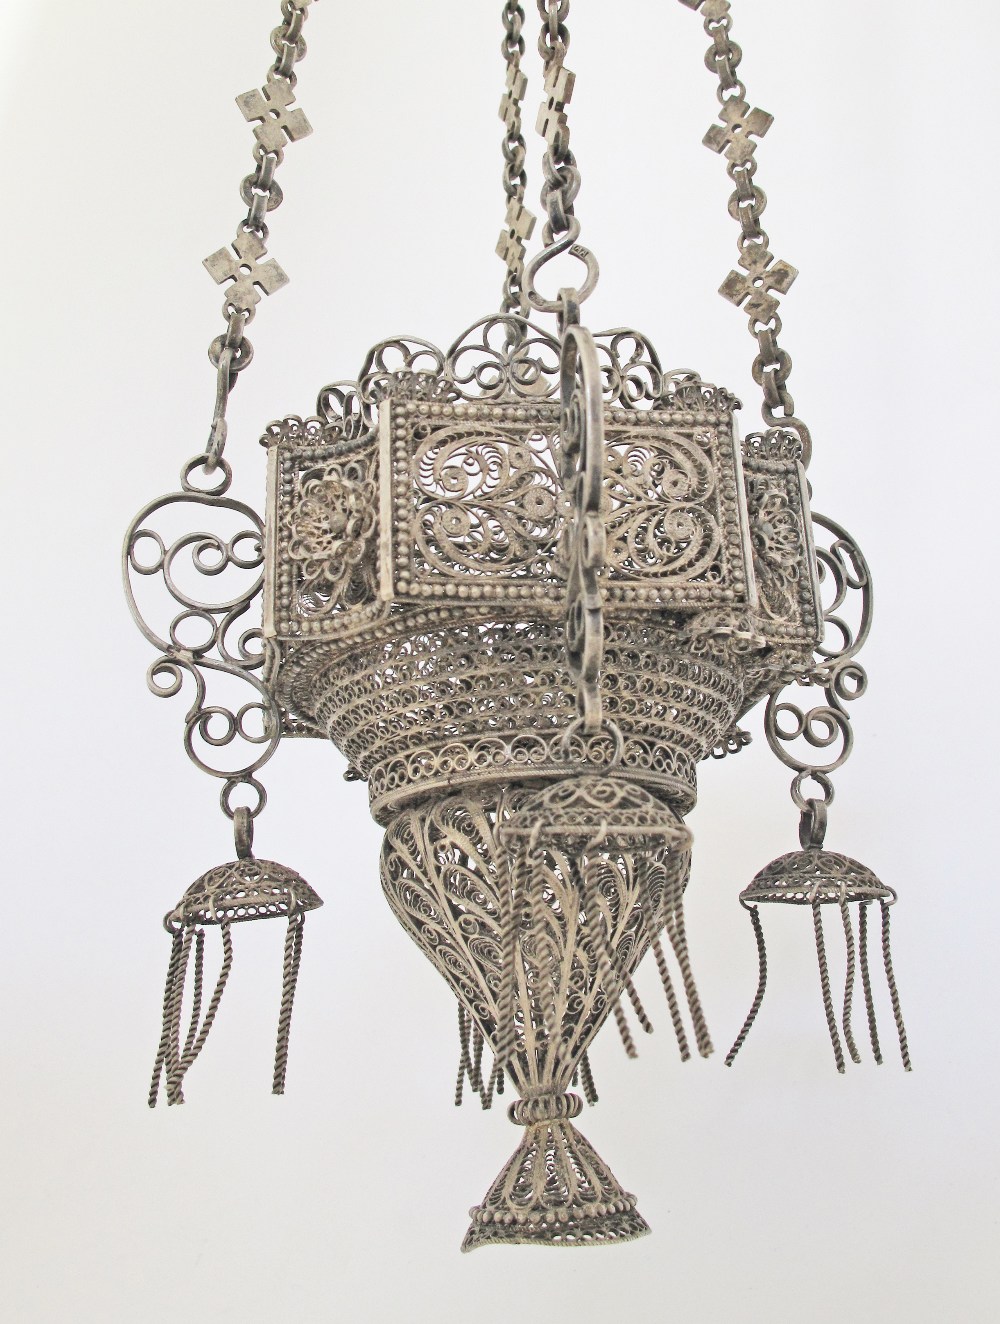 An Orthodox silver votive hanging lamp with filigree decoration. C18th / 19th century. H60cm, - Image 3 of 9